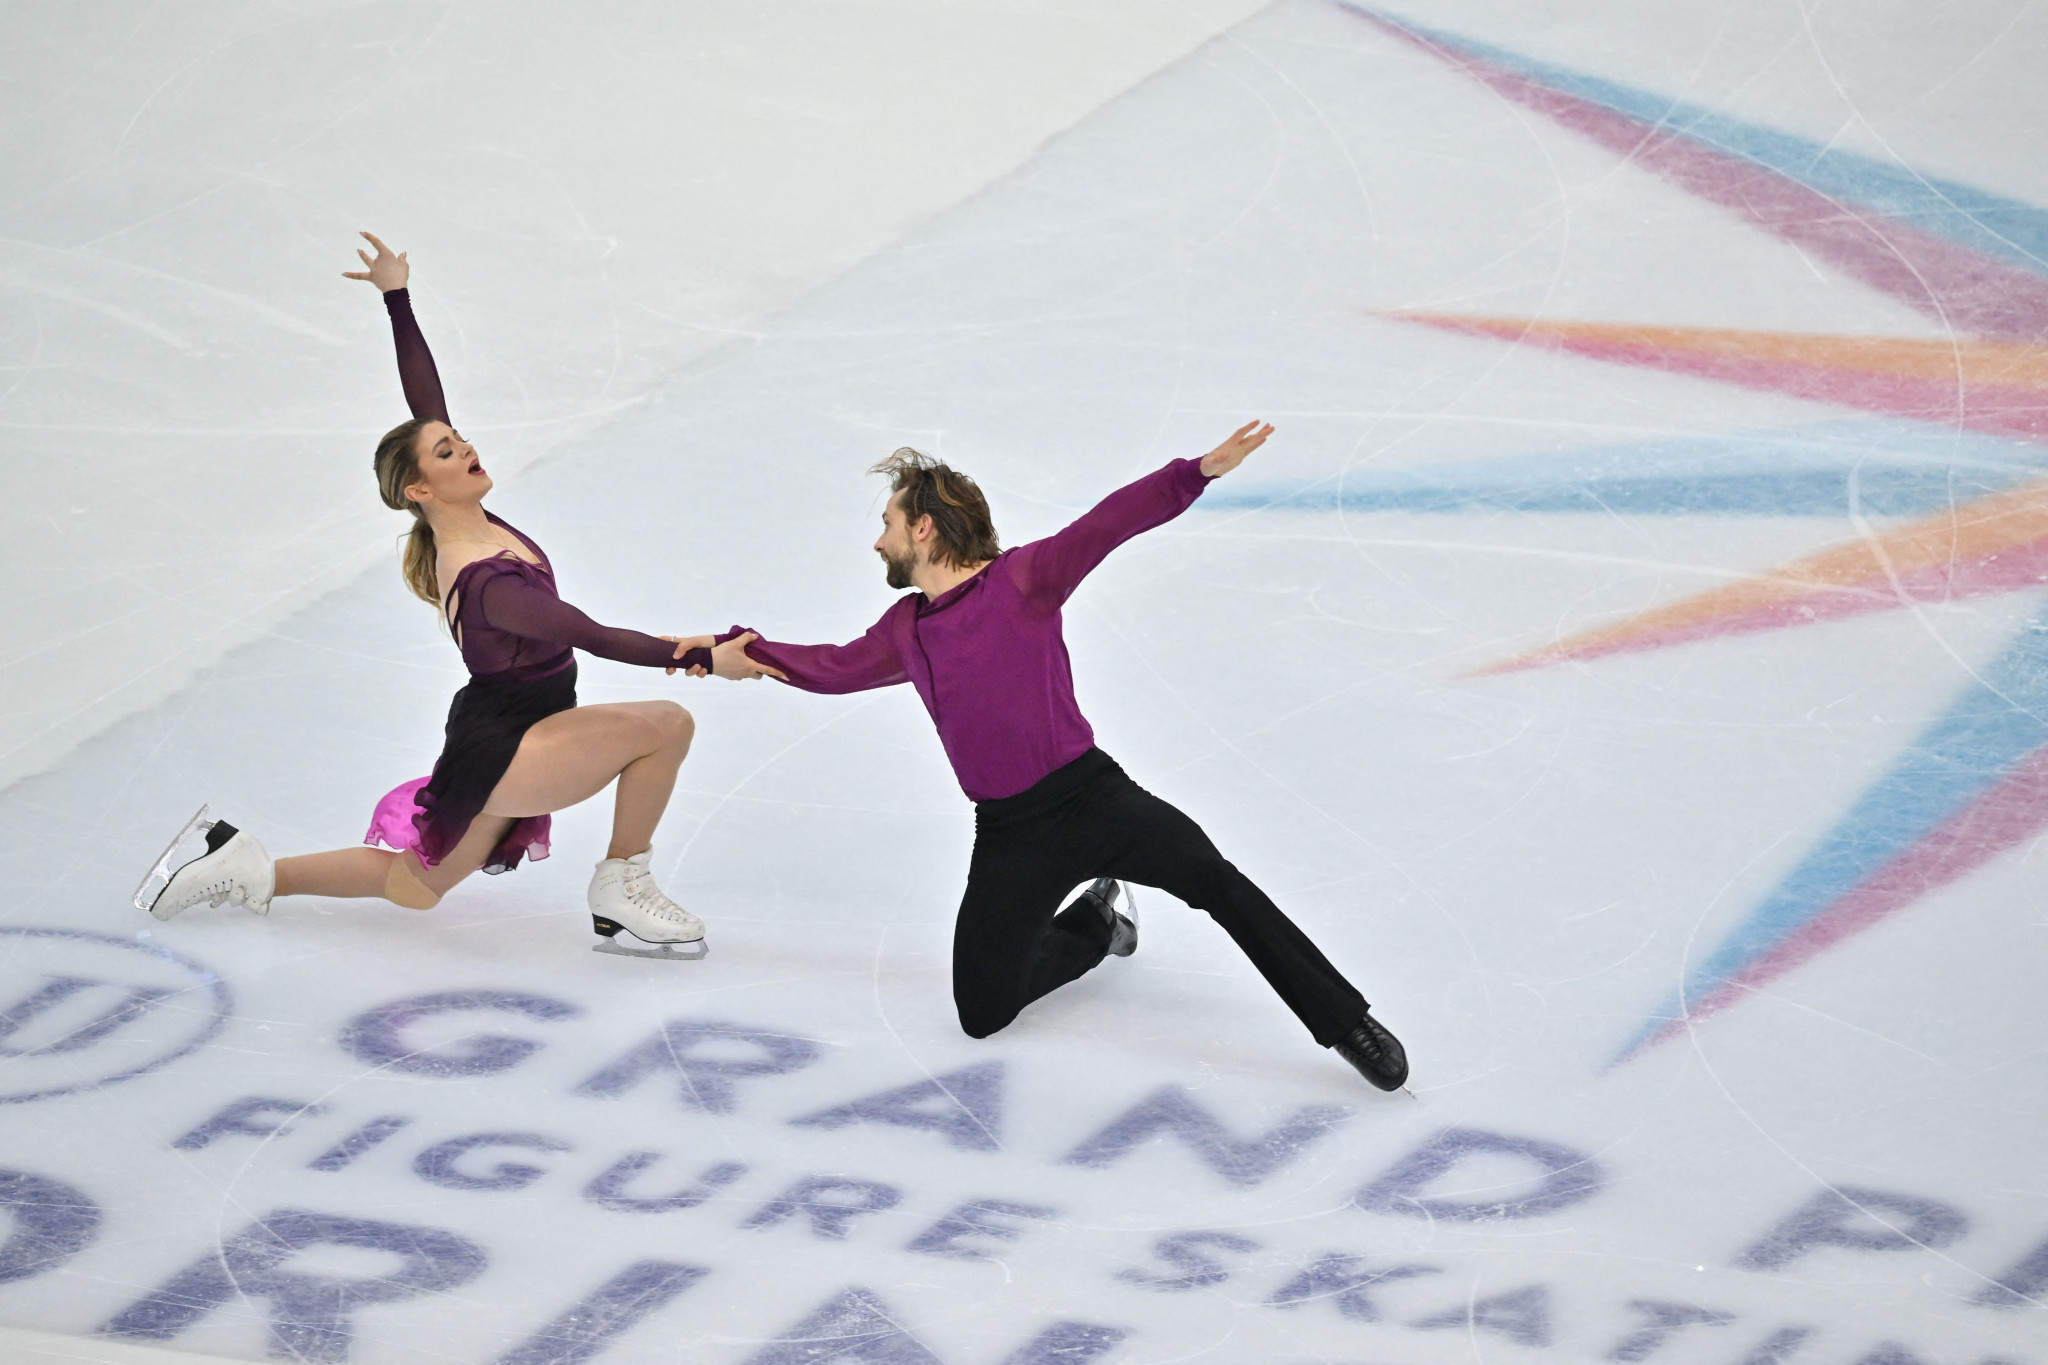 Kaitlin Hawayek and Jean-Luc Baker of the United States have not competed since last December ©Getty Images